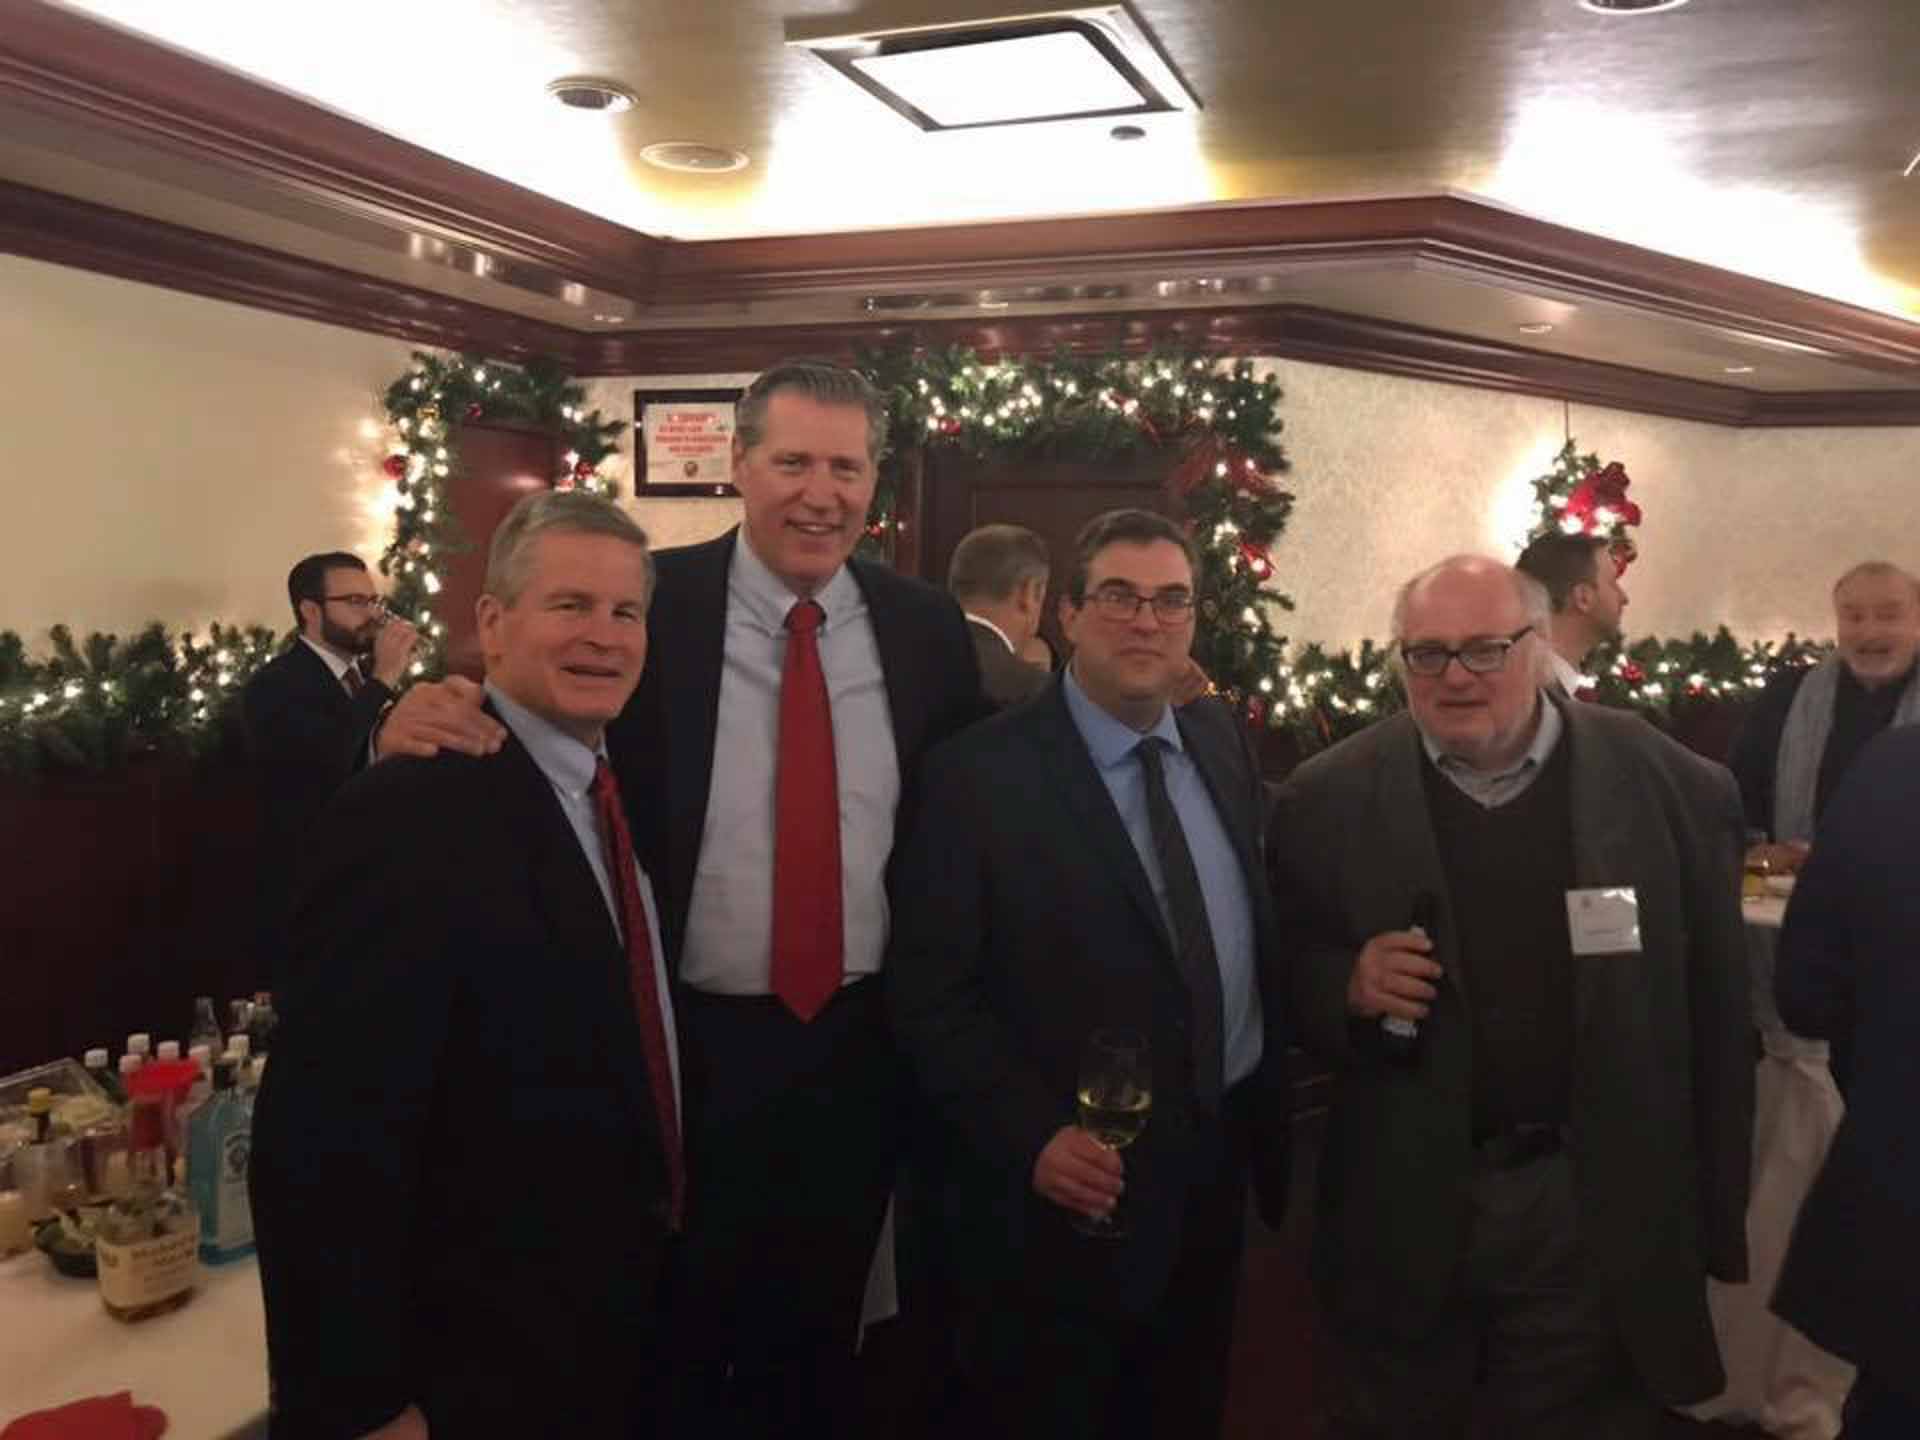 law-association-christmas-social-2019-three-people-and-the-school-president-smile-for-photo